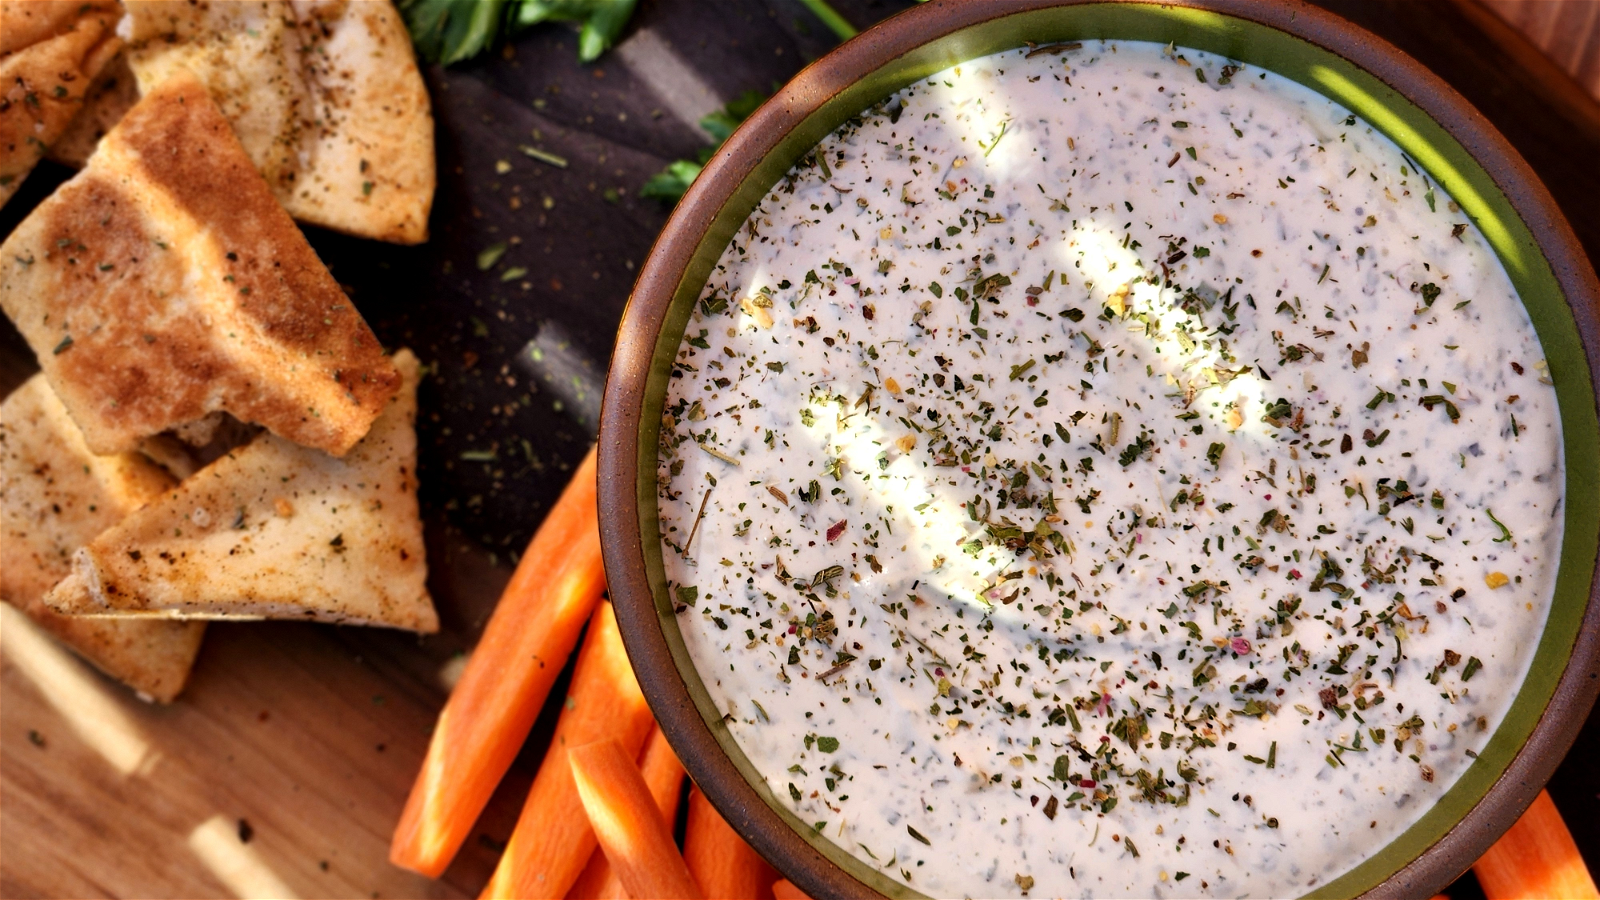 Image of Cool and Creamy Wild Green Goddess Dip